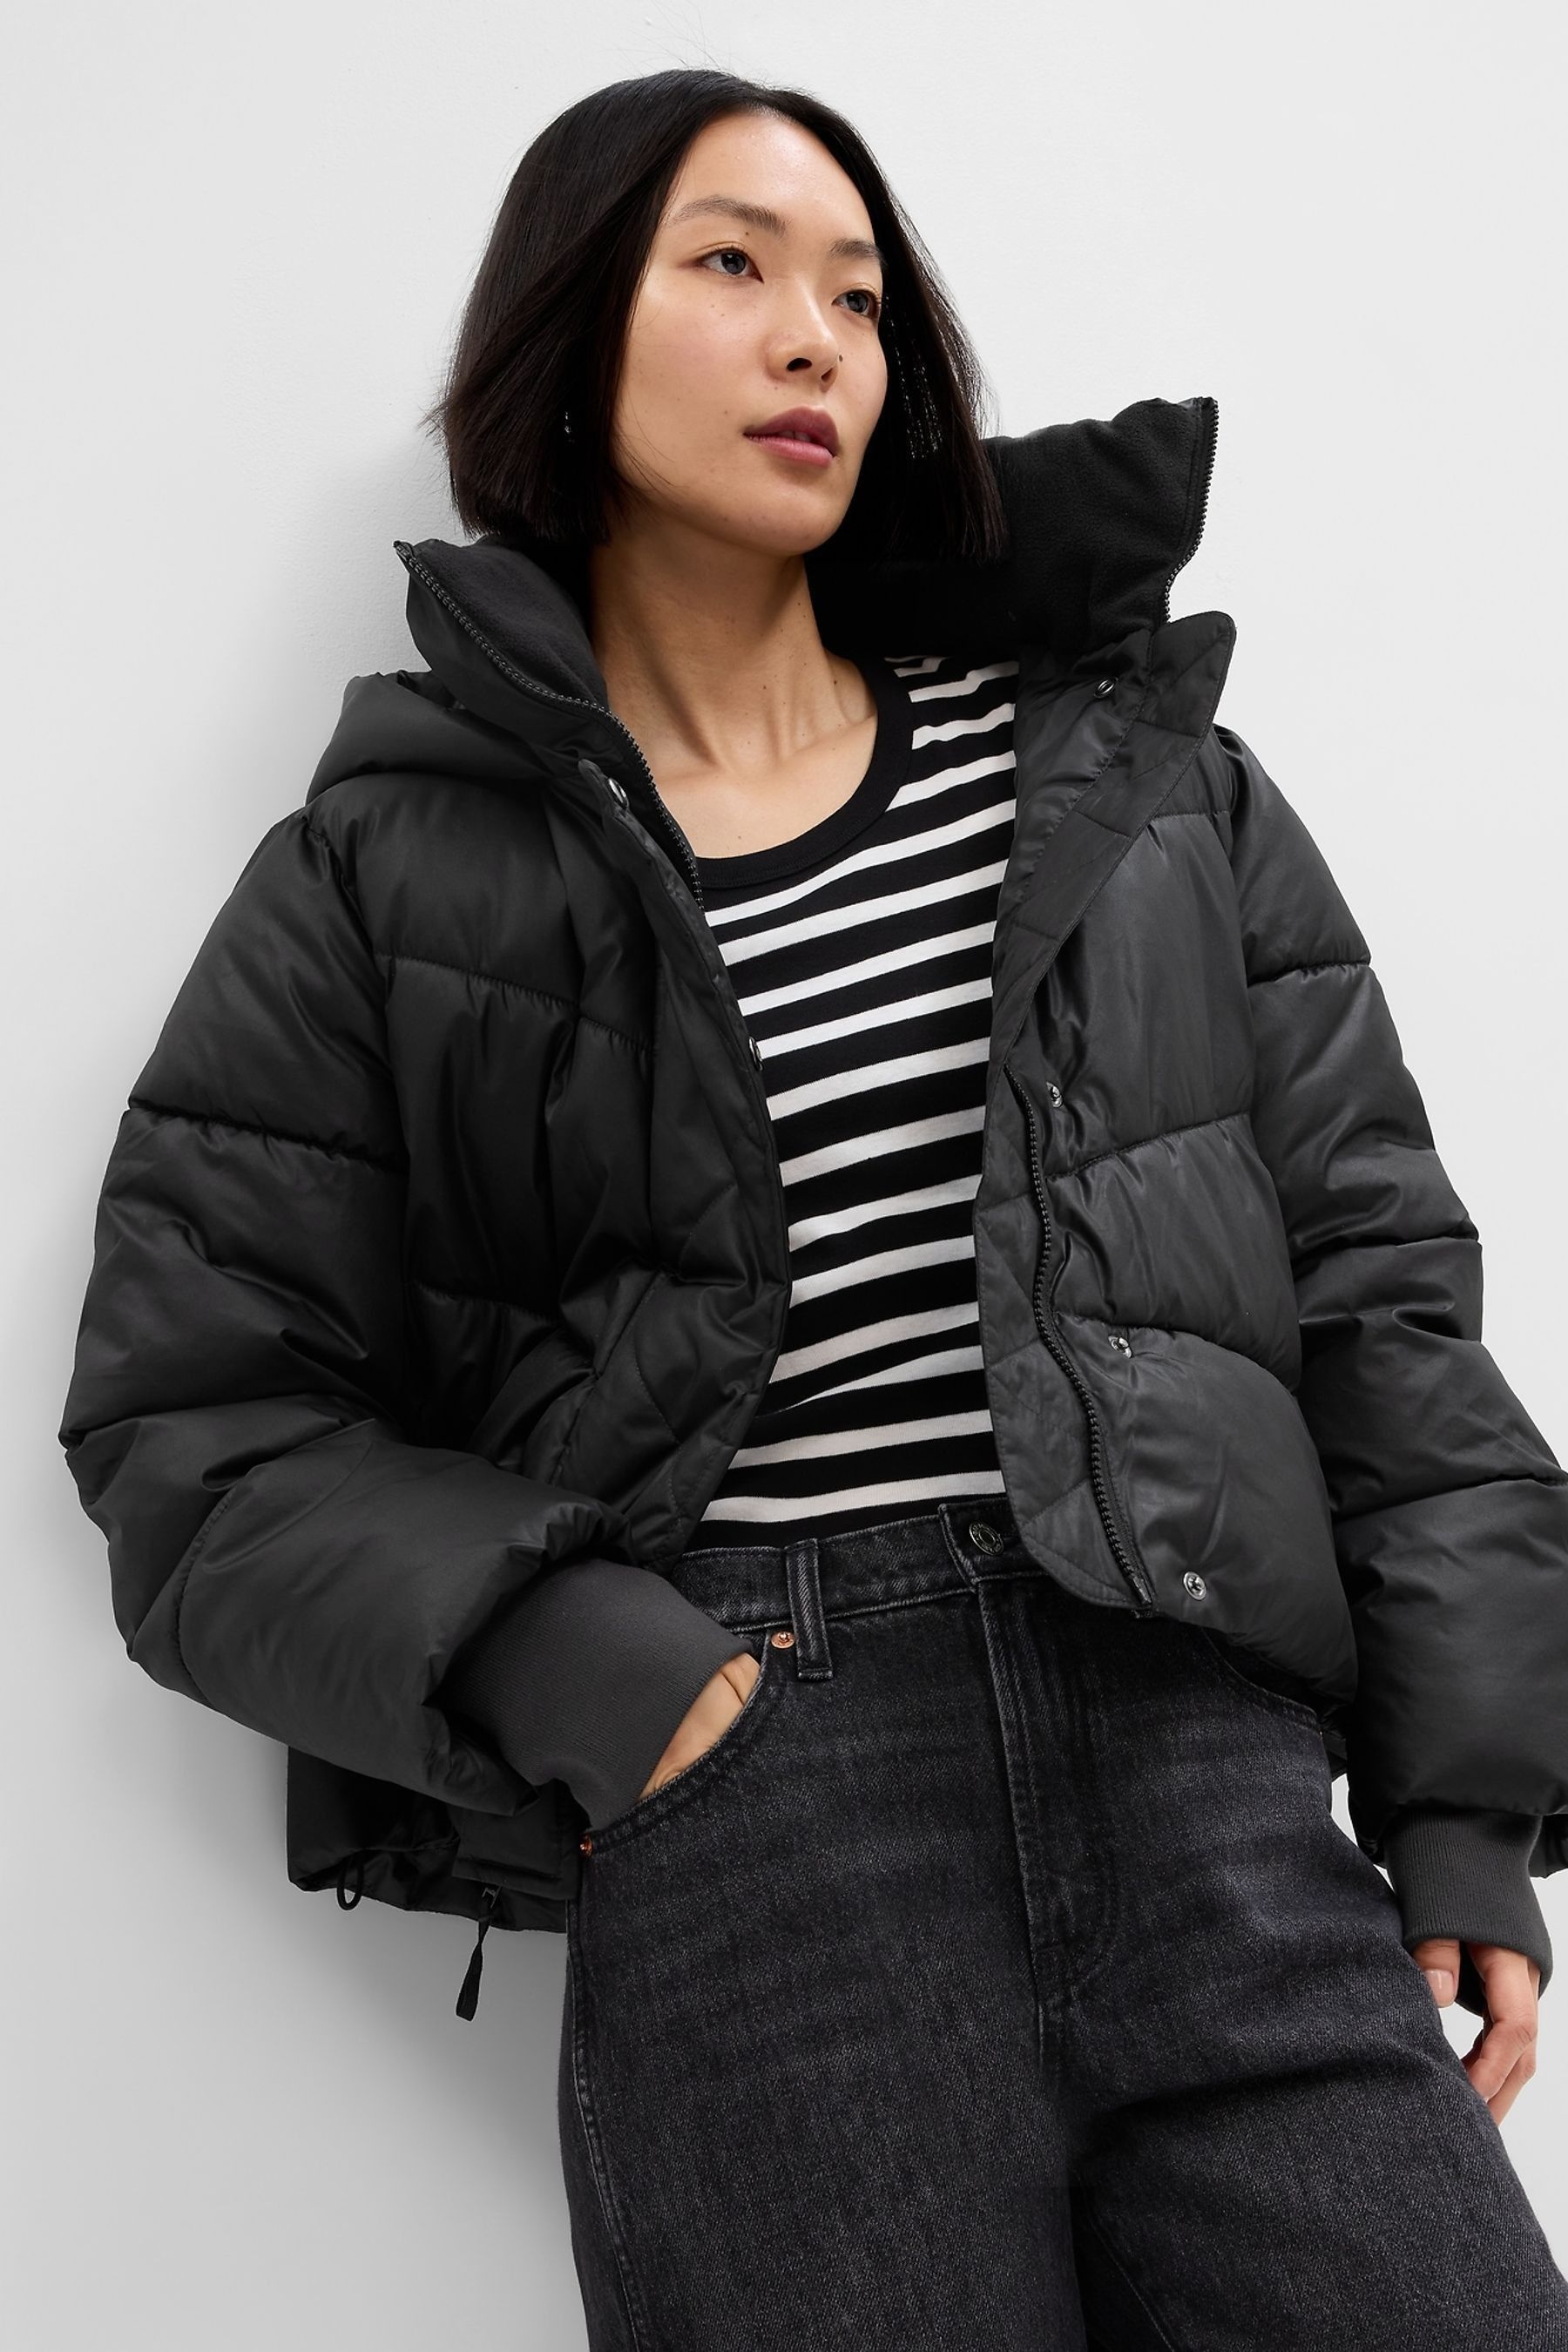 Buy Gap Cropped ColdControl Max Puffer Coat from the Gap online shop